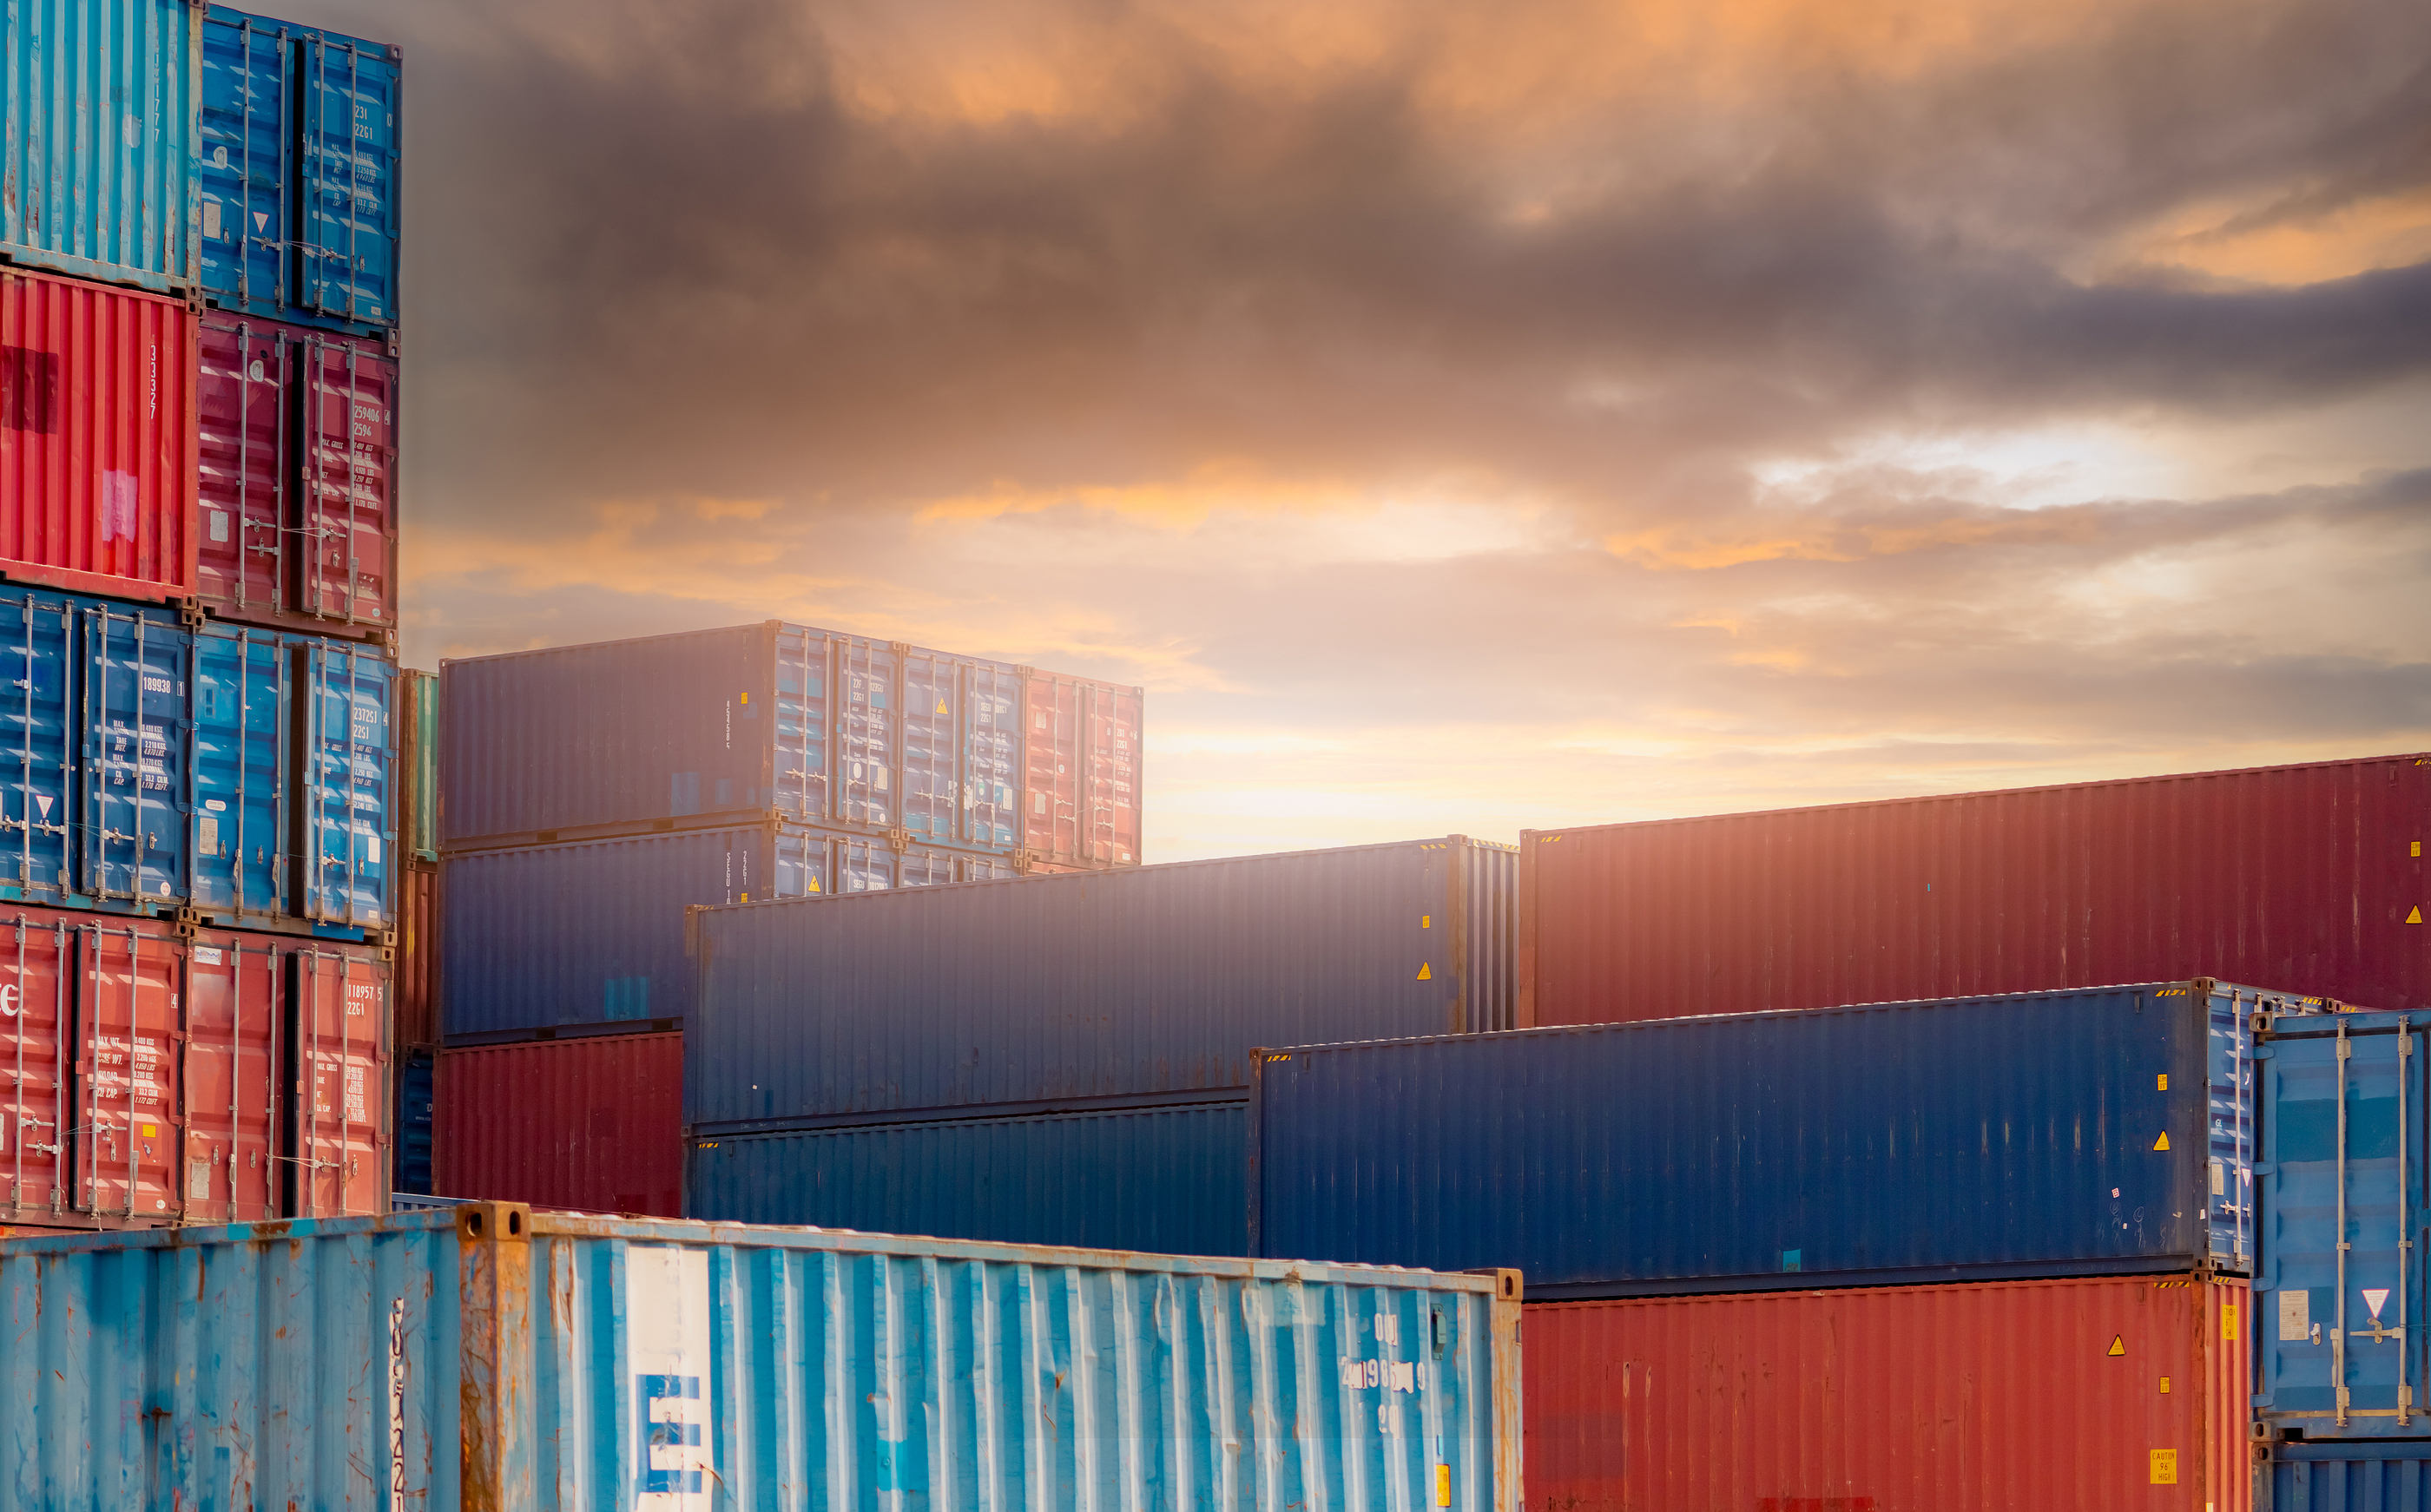 Containers stacking up in global suply shock